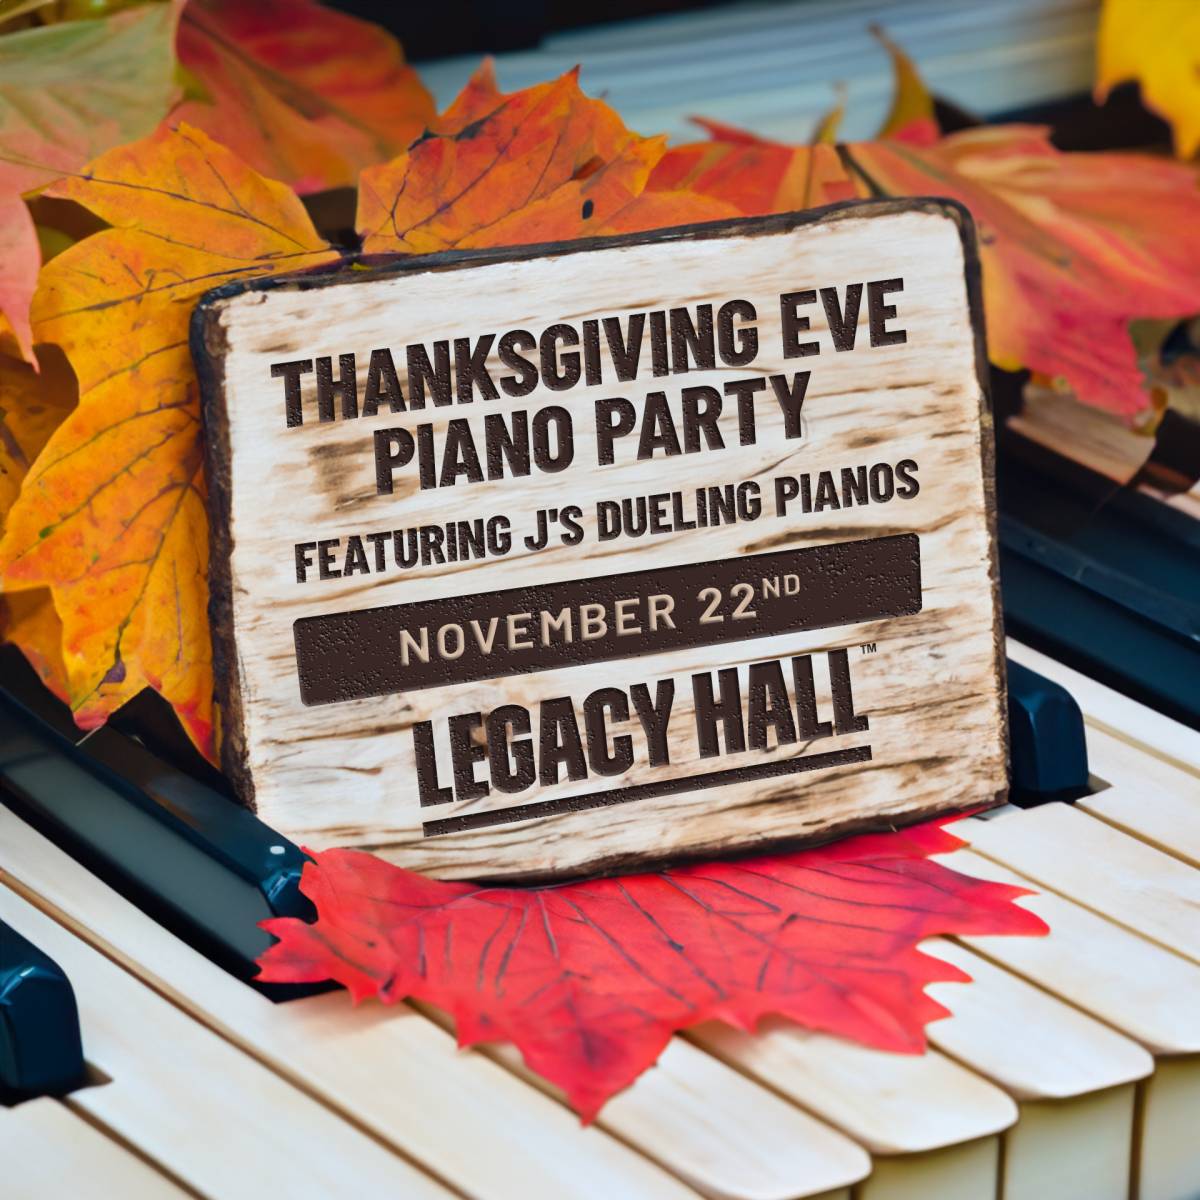 Thanksgiving Eve Piano Party with J's Dueling Pianos